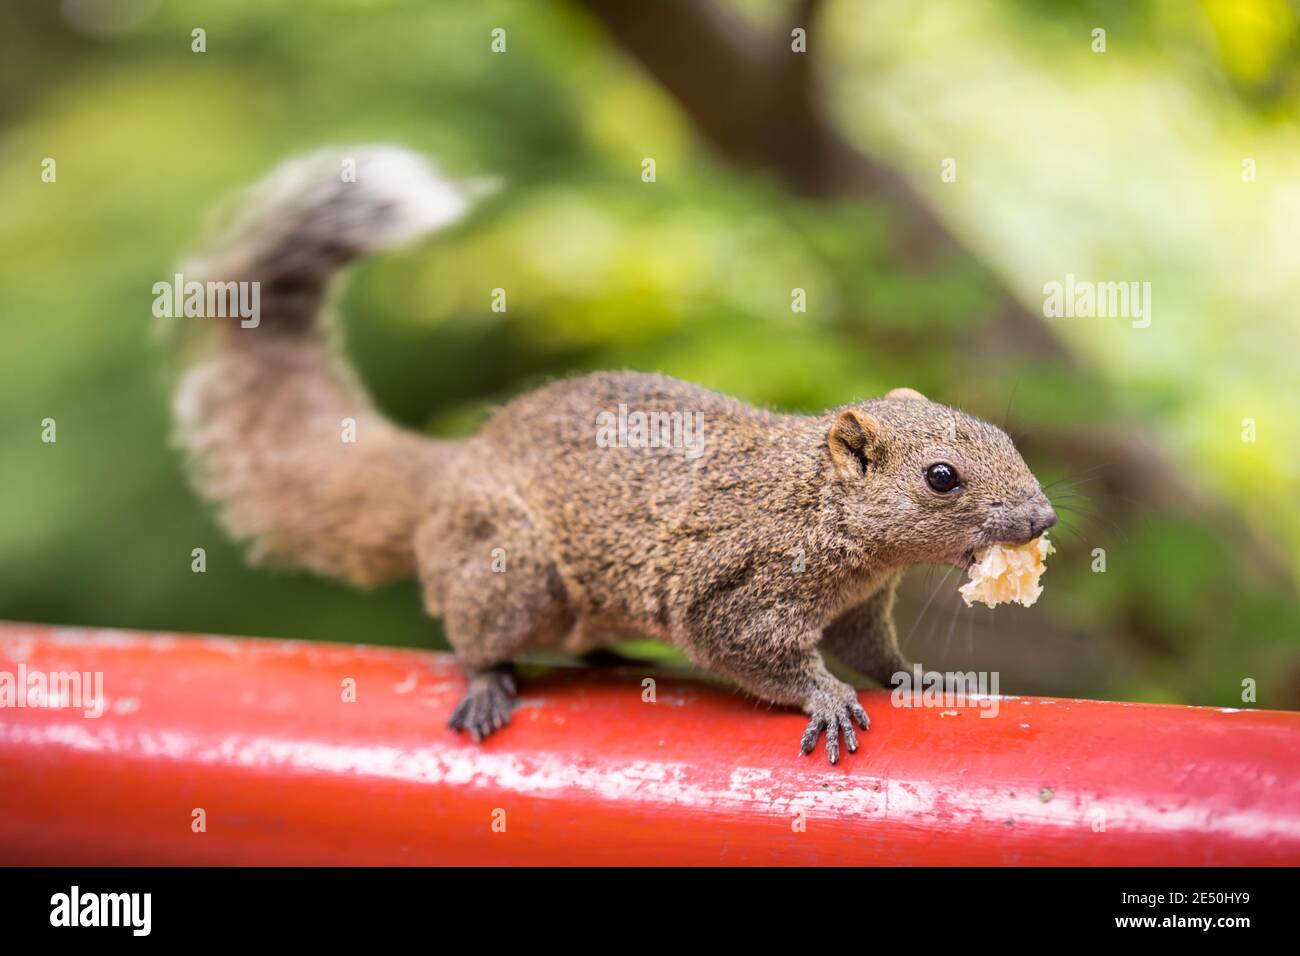 Close up of a wary grey squirrel holding a morsel of bread in its mouth, and standing on a red wooden pole, against a bright green bokeh background Stock Photo